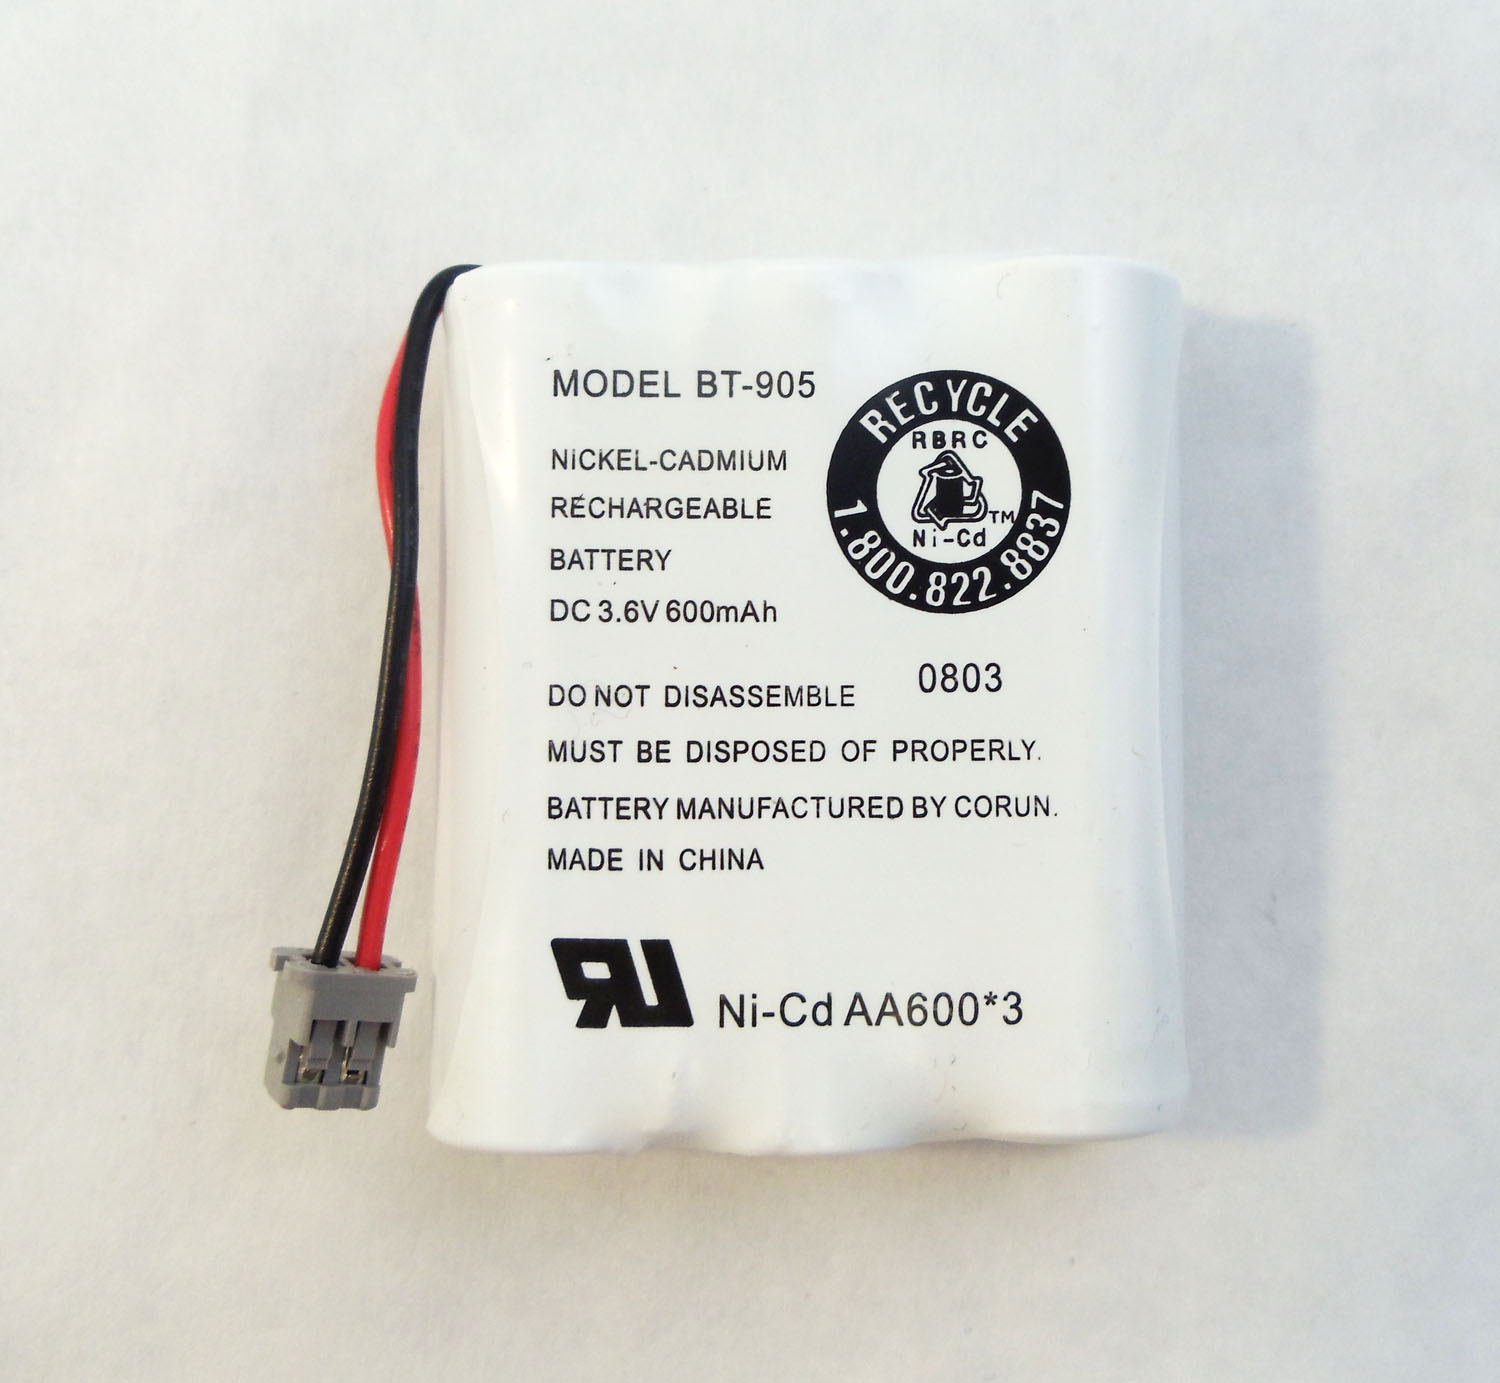 Battery Pacl For Exp92/Exa915/Exai918/Ehd1200